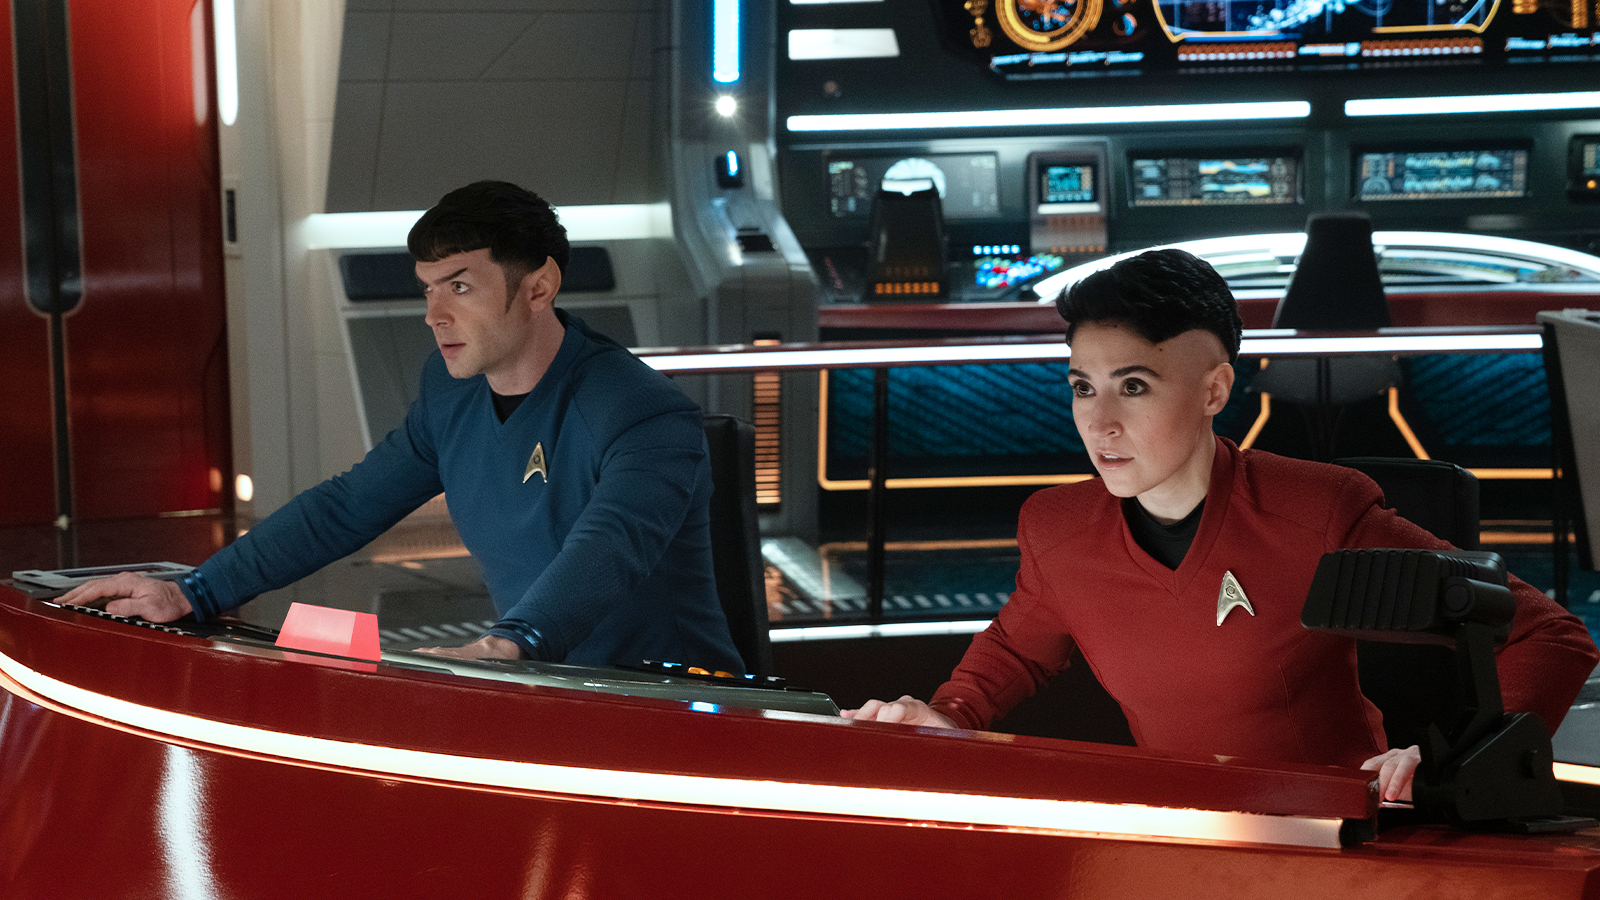 Star Trek: Strange New Worlds “Among the Lotus Eaters” preview + new photos